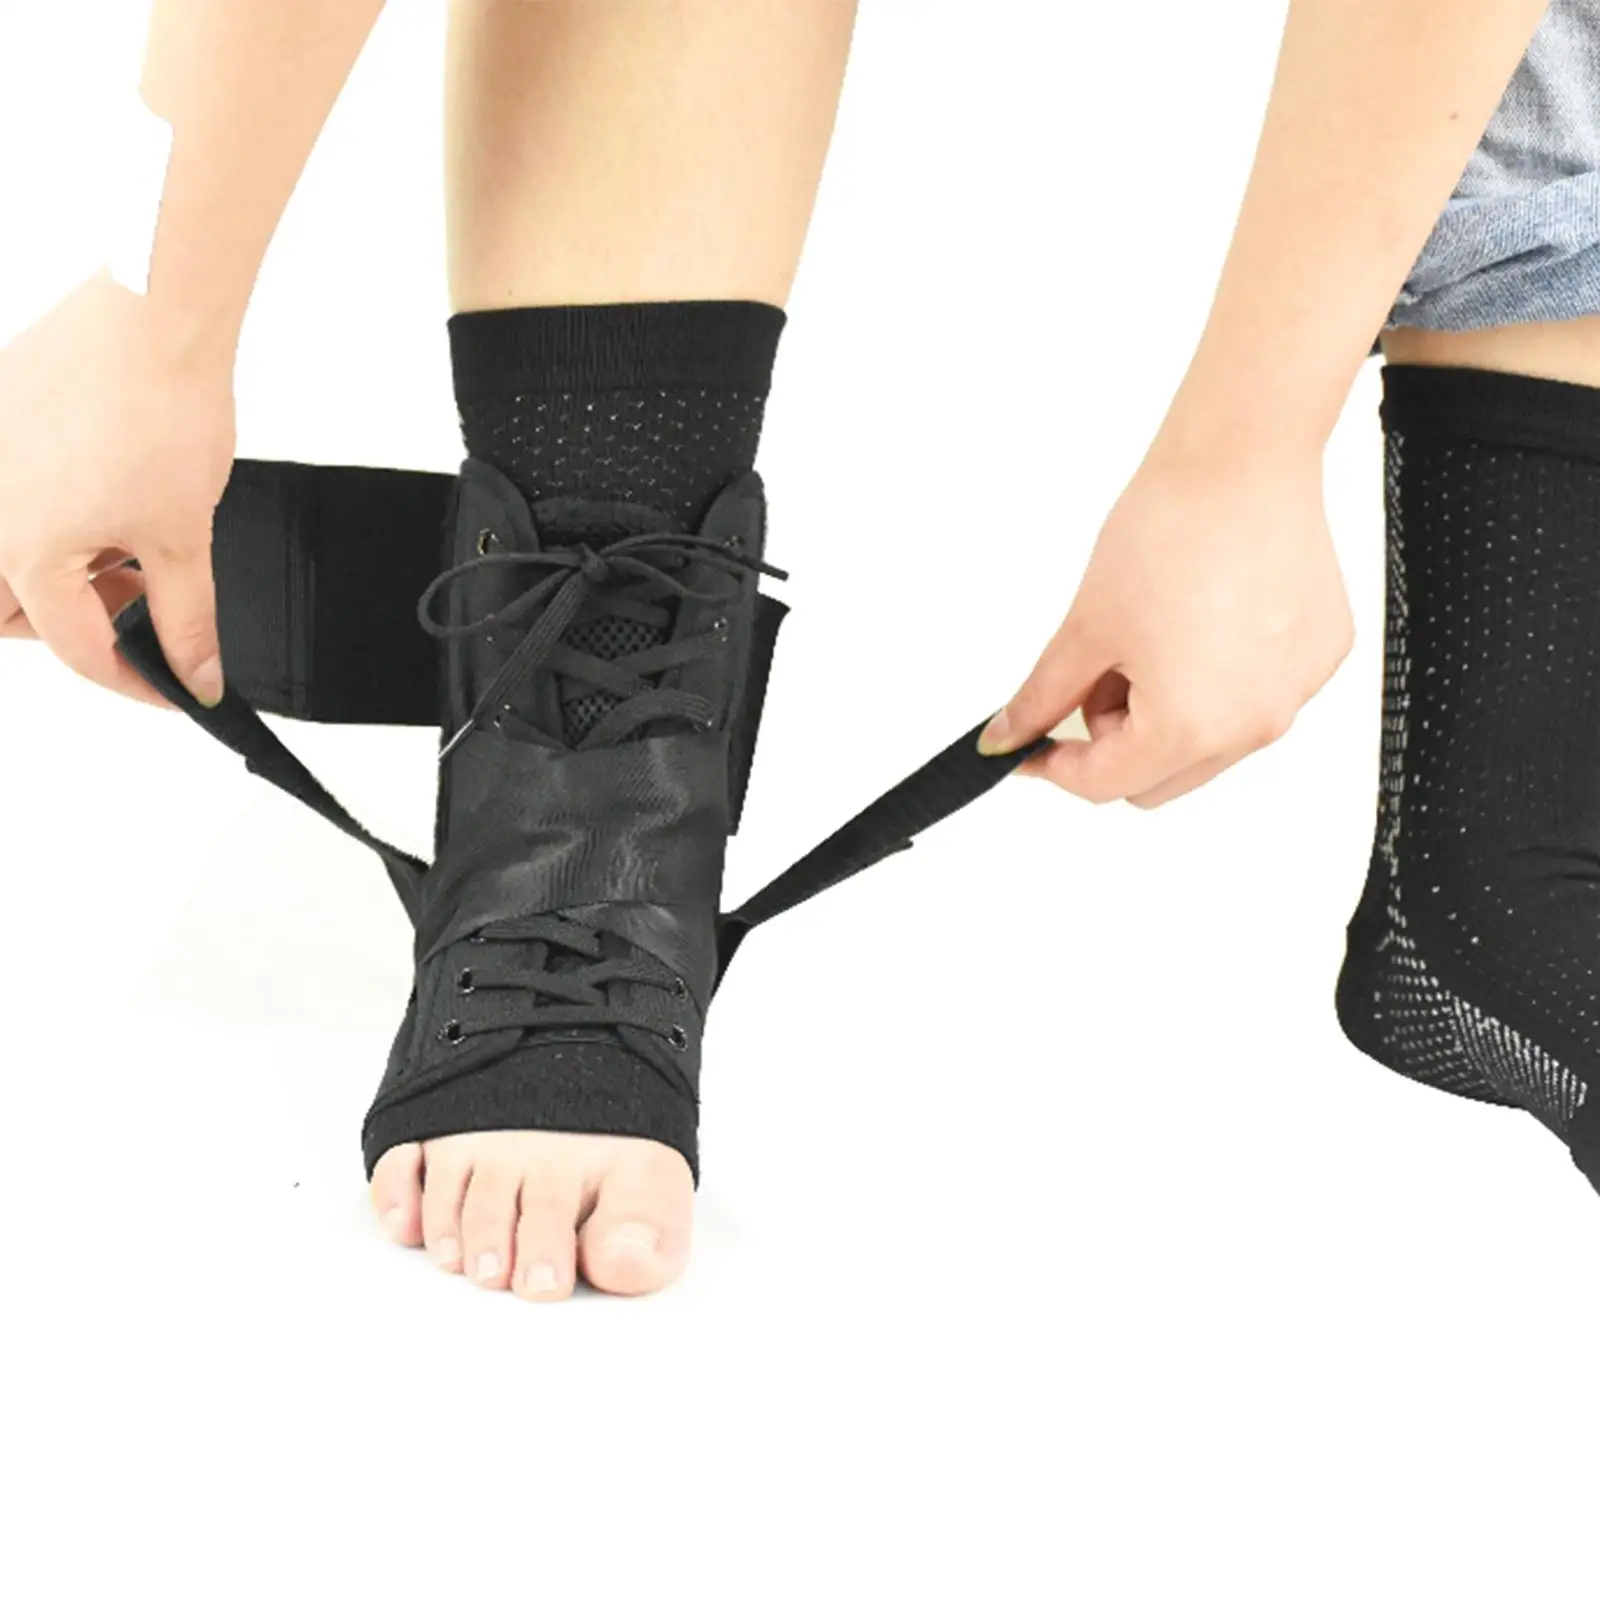 Ankle Brace Suppor Compression Socks Sleeve Pain for Running Soccer Football